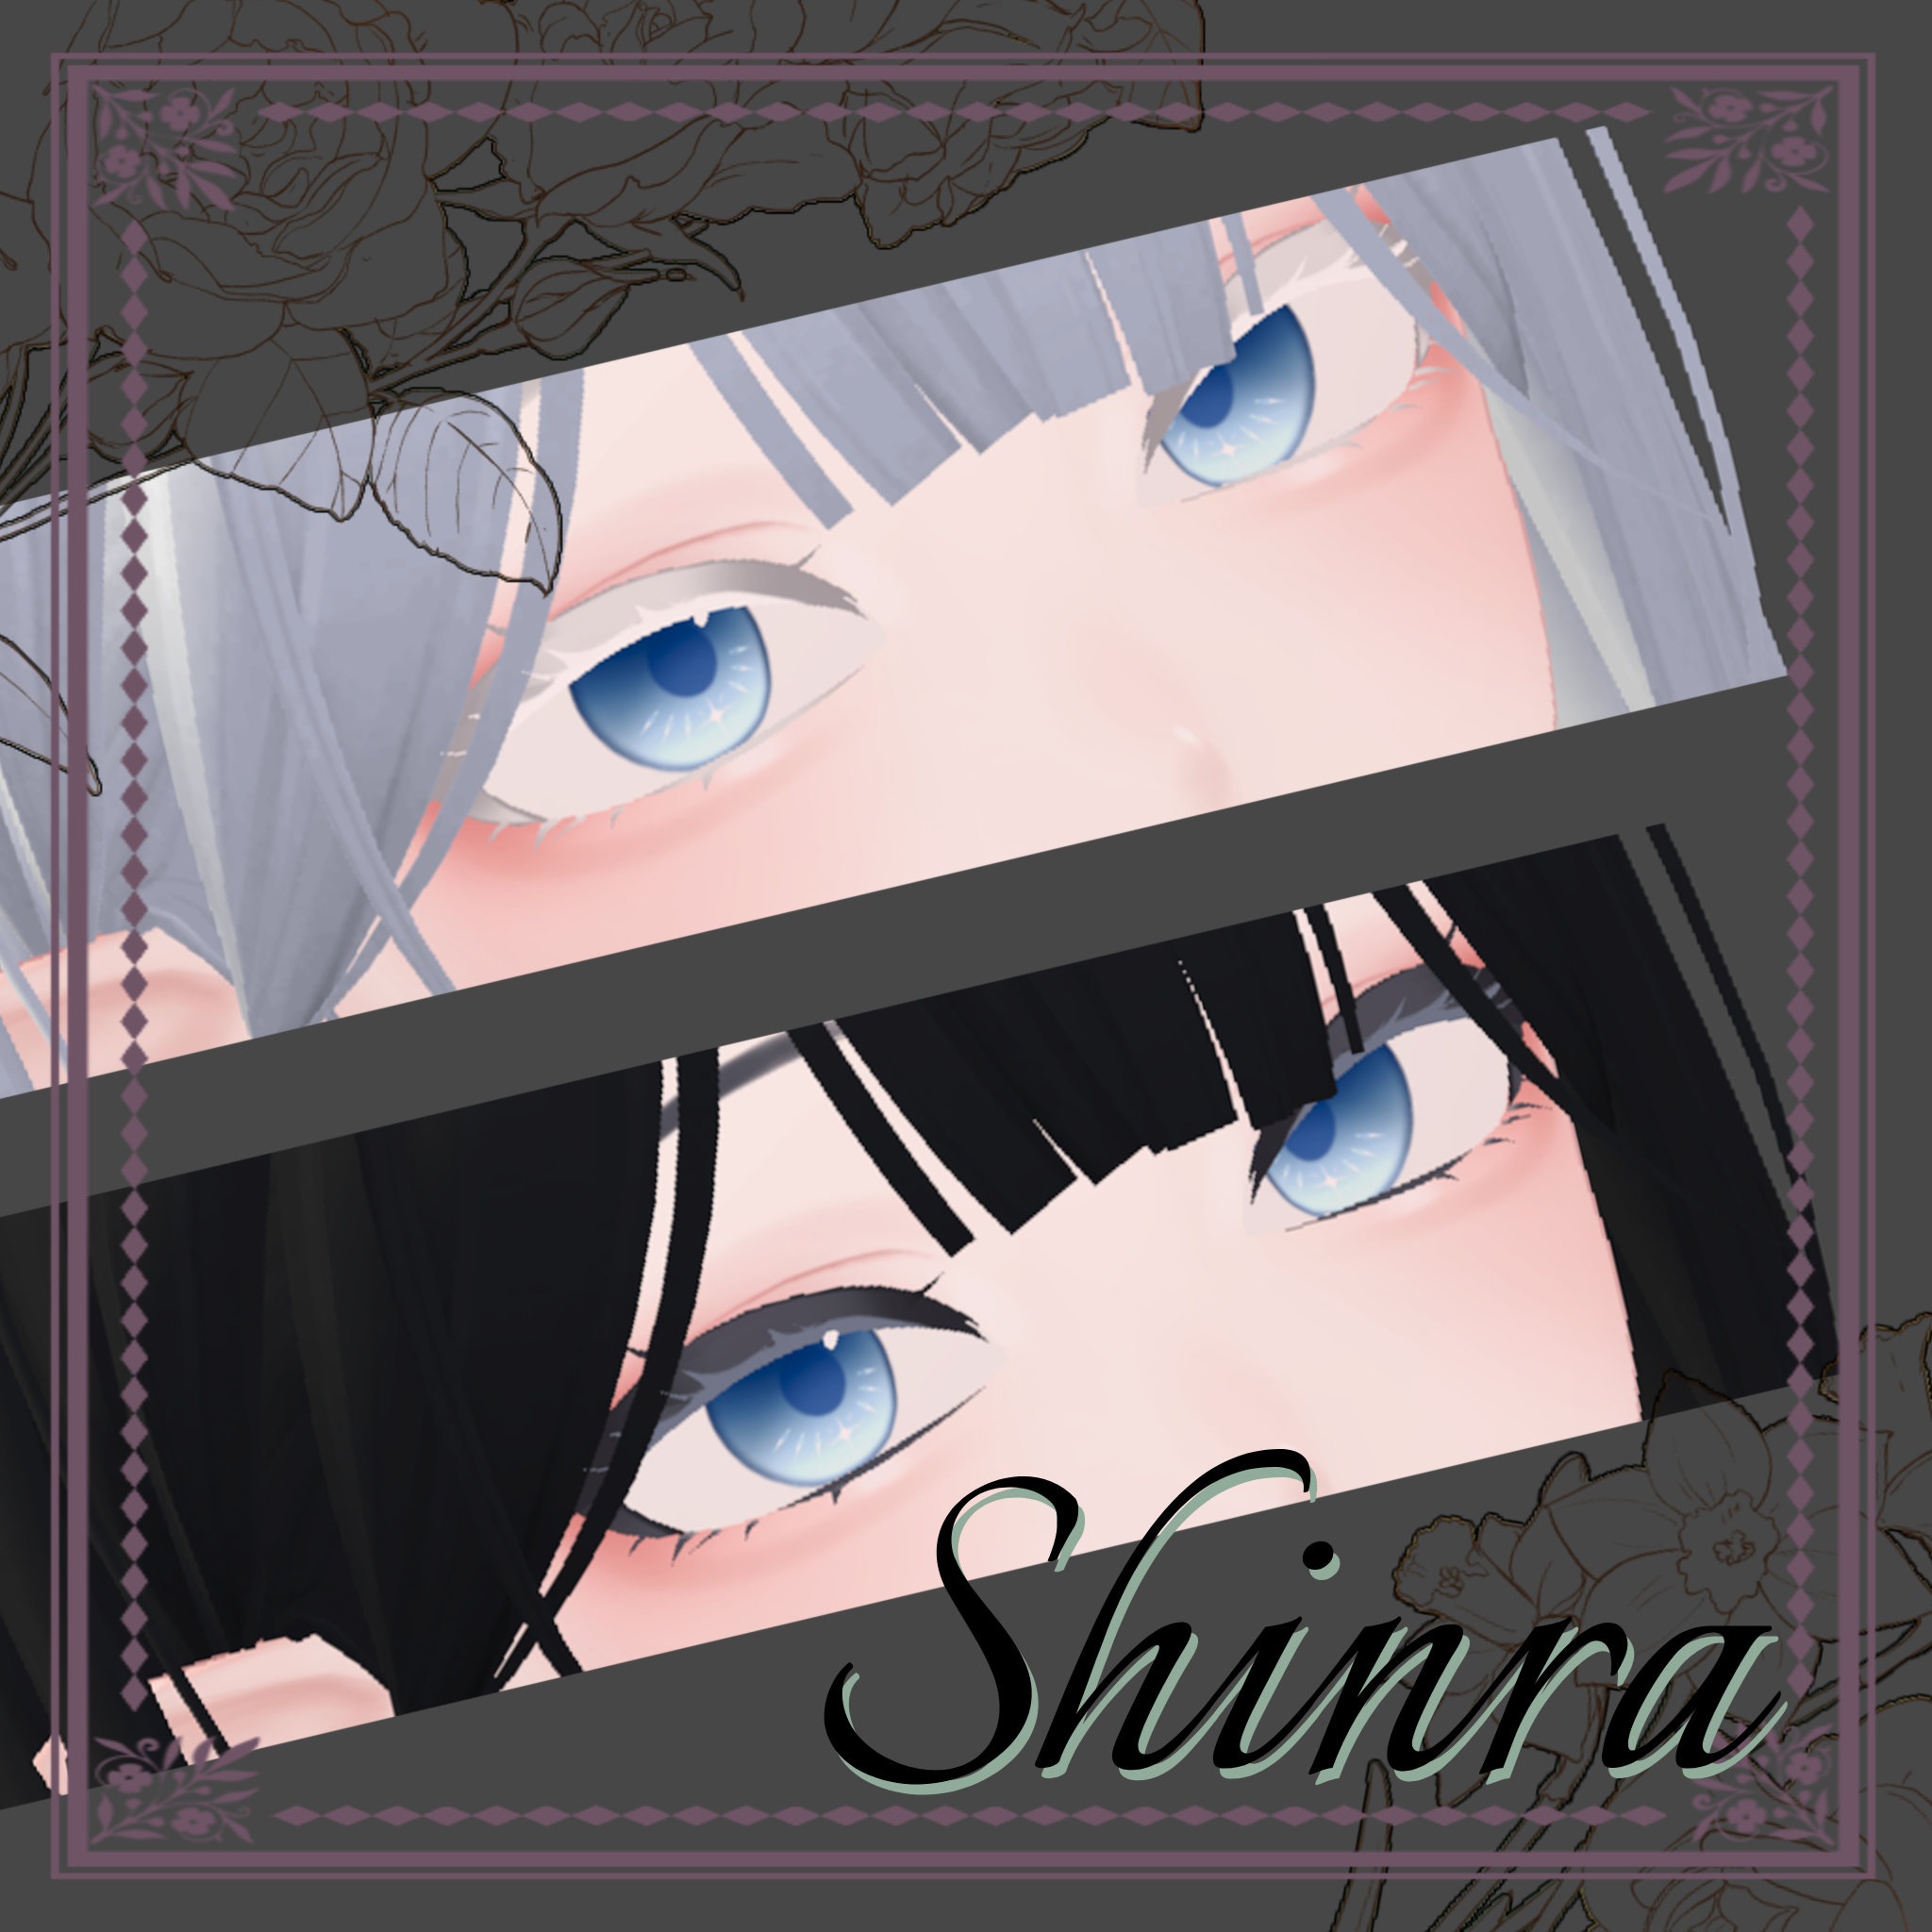 Shinra pfp  Community, Discord, Places to visit